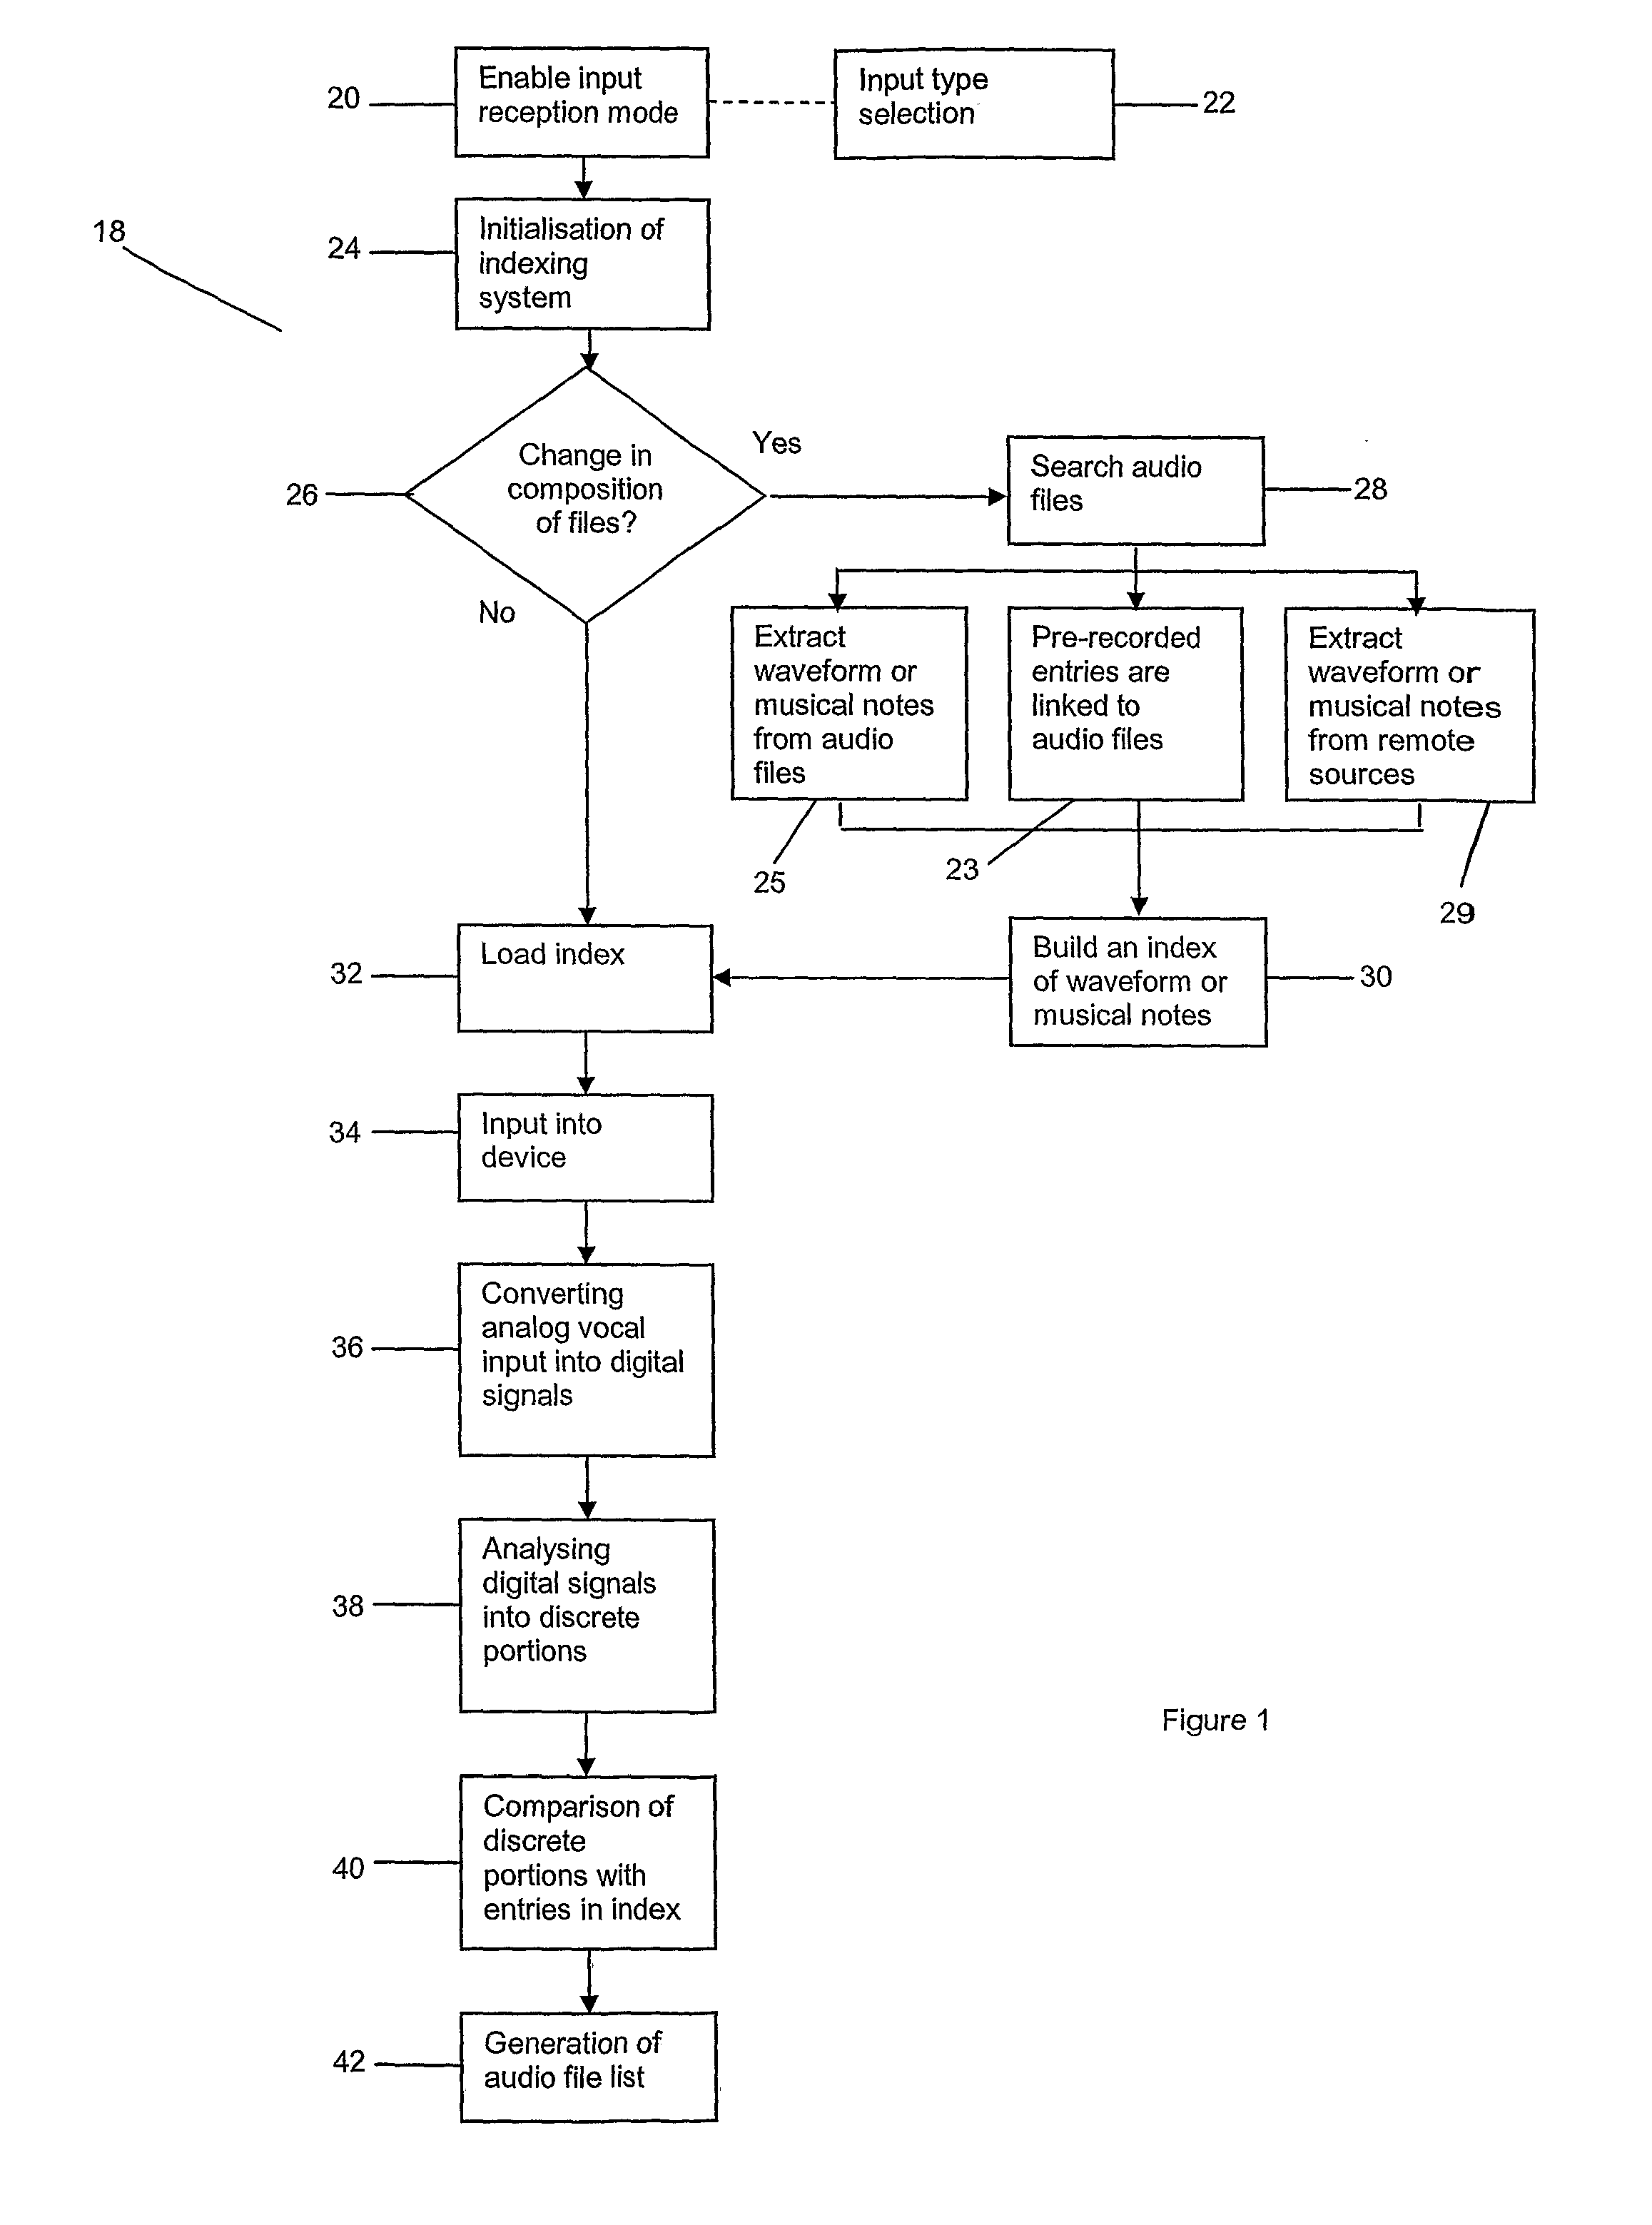 Method and apparatus for accessing an audio file from a collection of audio files using tonal matching